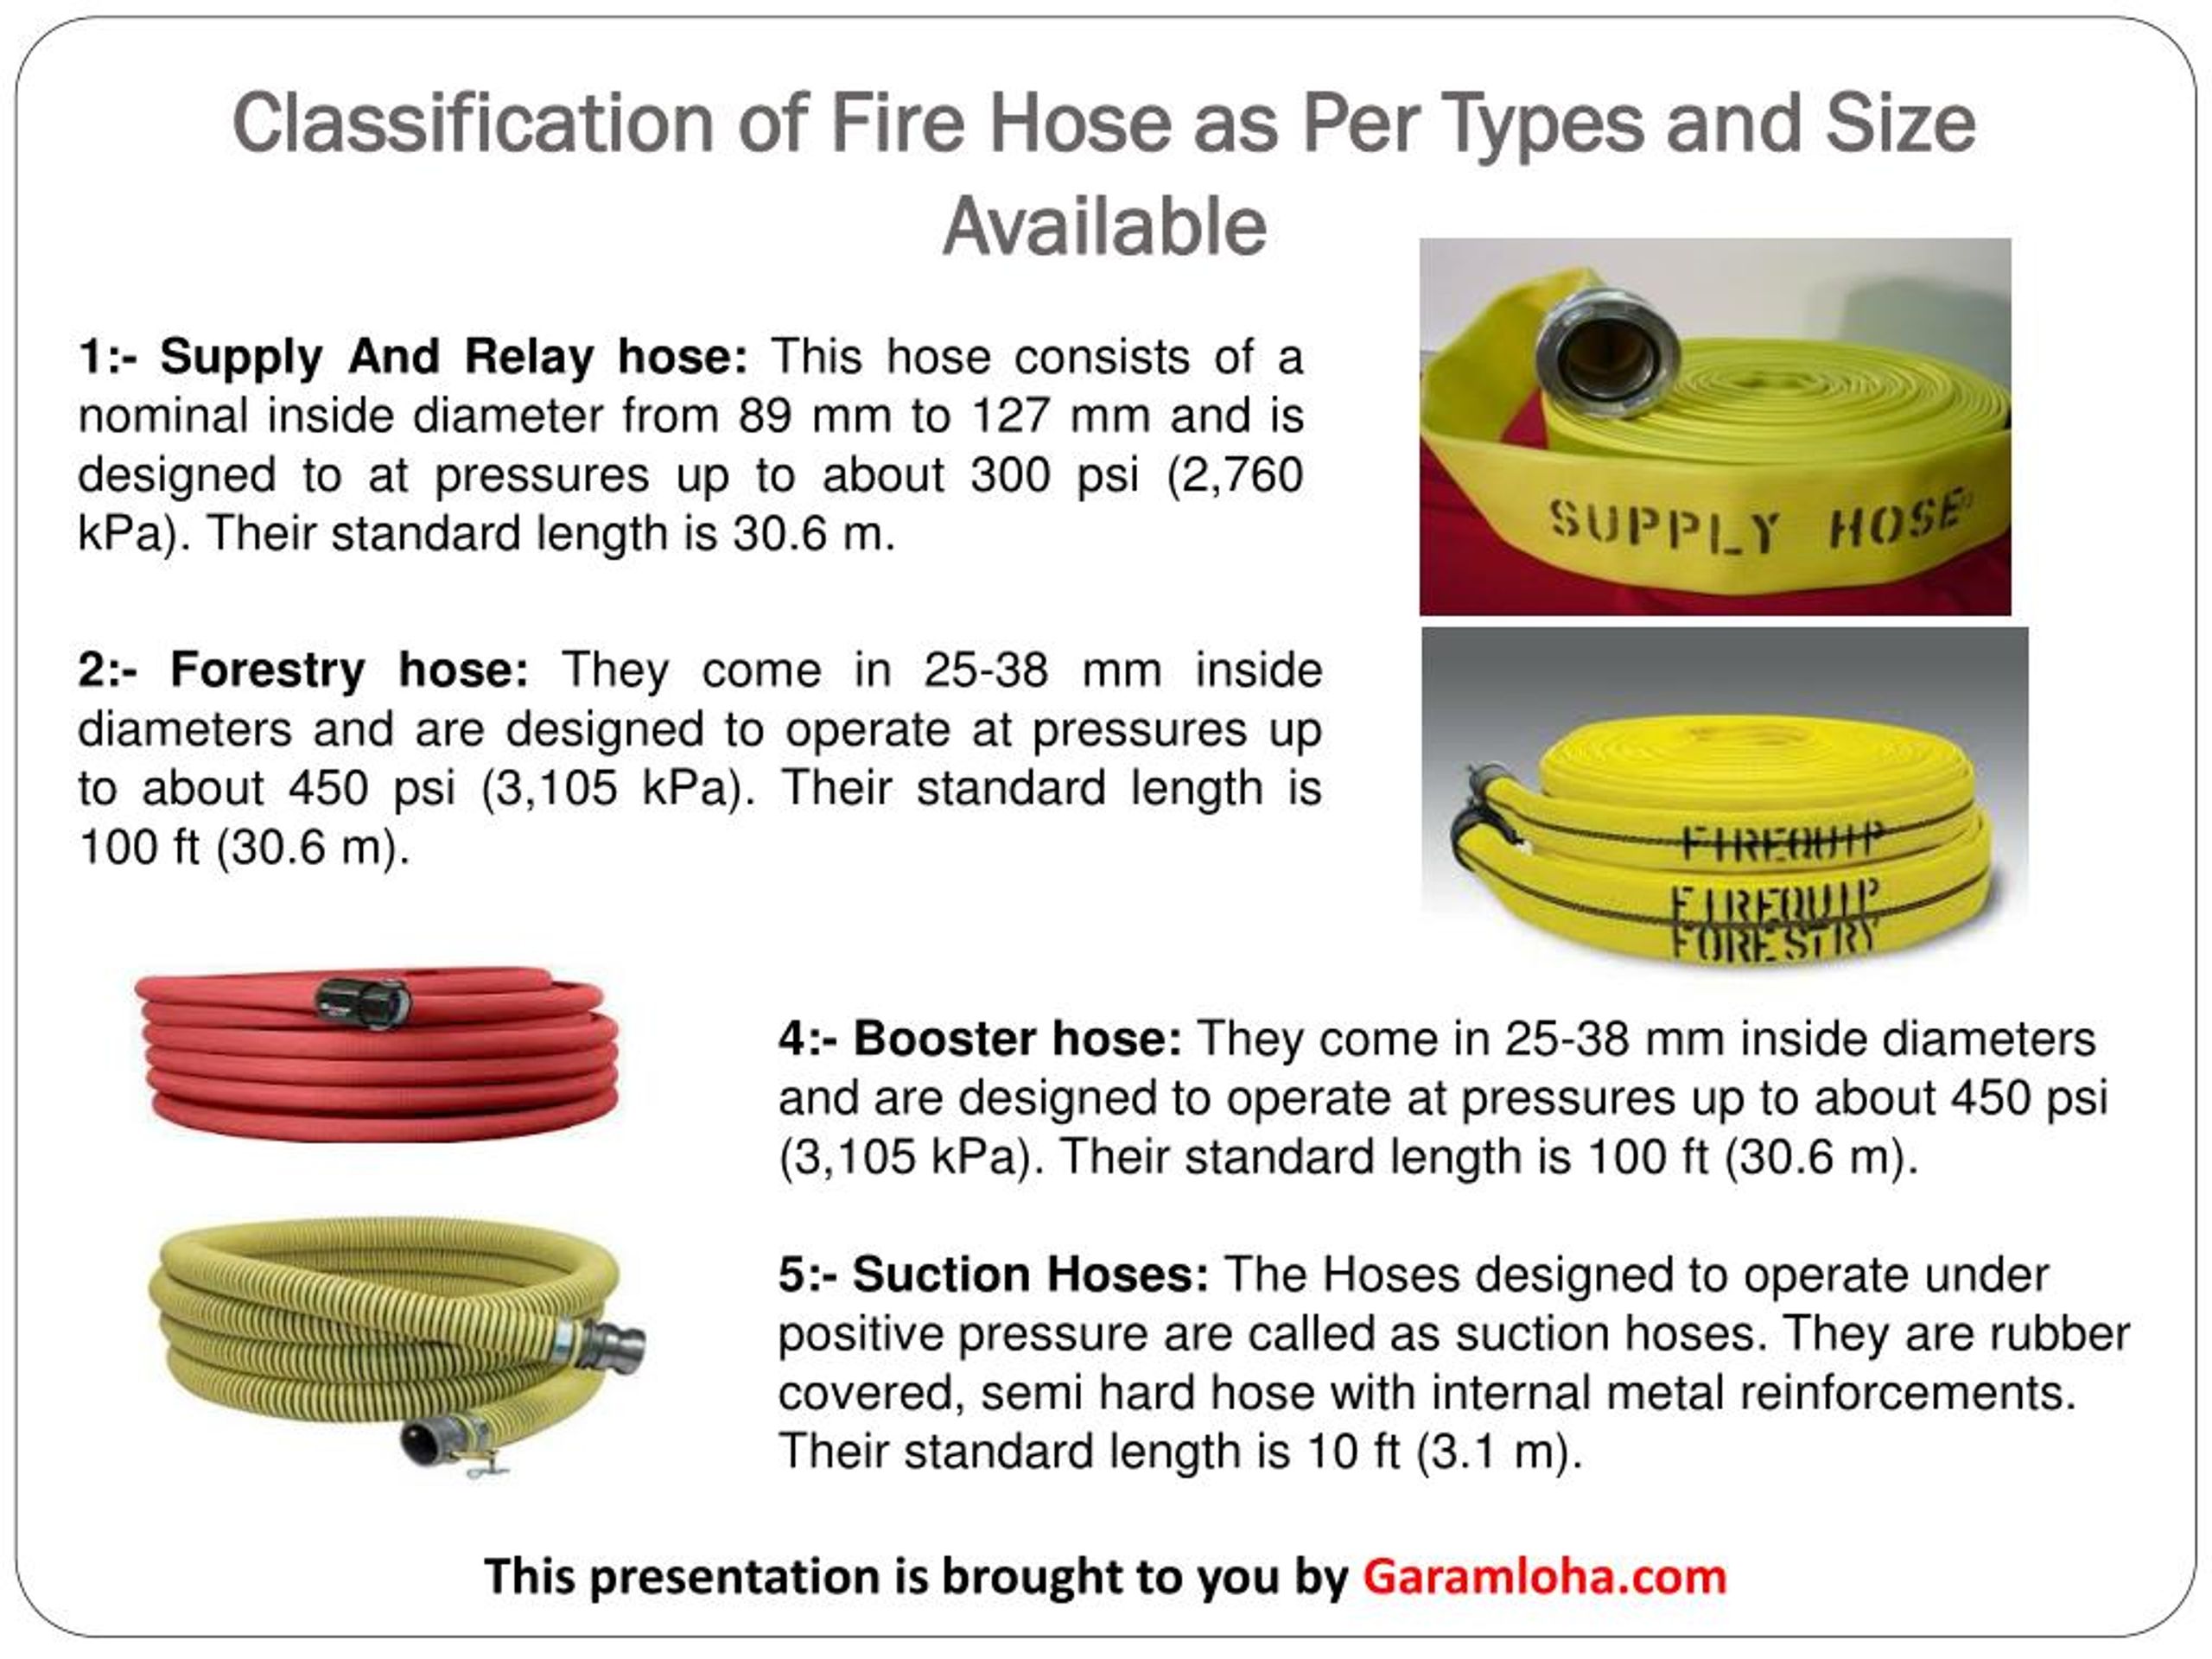 PPT Fire Hose Pipes A Fire Extinguisher Tube To Give Relief From Disasters PowerPoint